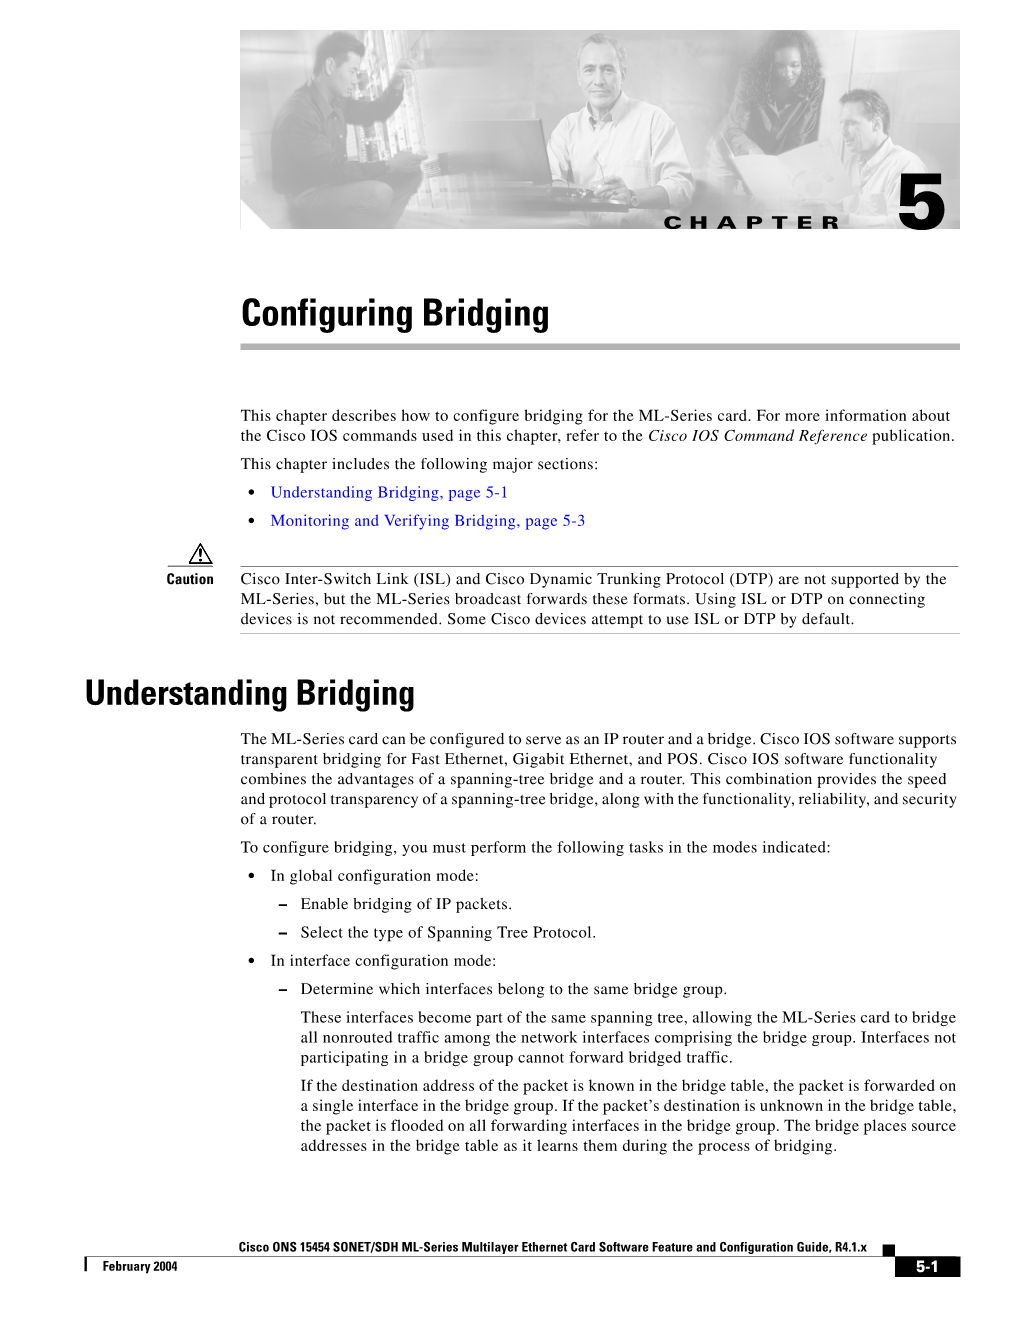 Chapter 5, Configuring Bridging